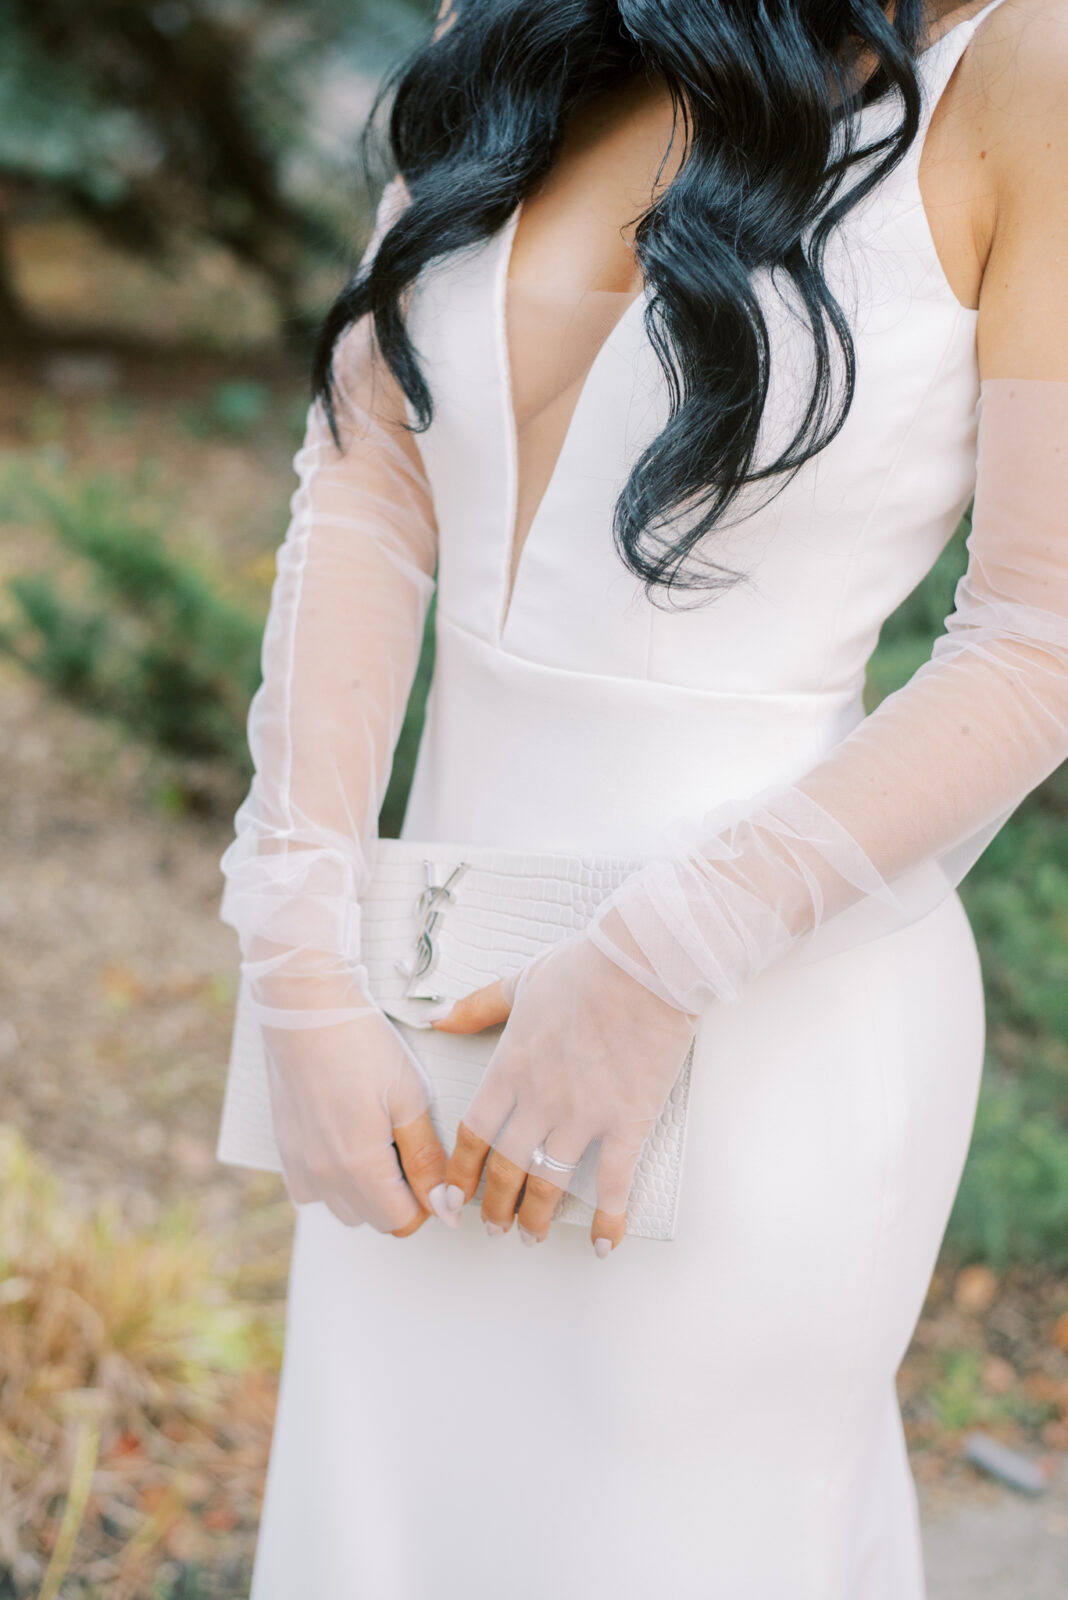 Modern bridal fashion: Showcasing the latest trends and styles for brides, white bridal clutch style, simple and modern wedding gown from Delica Bridal styled with sheer bridal gloves 